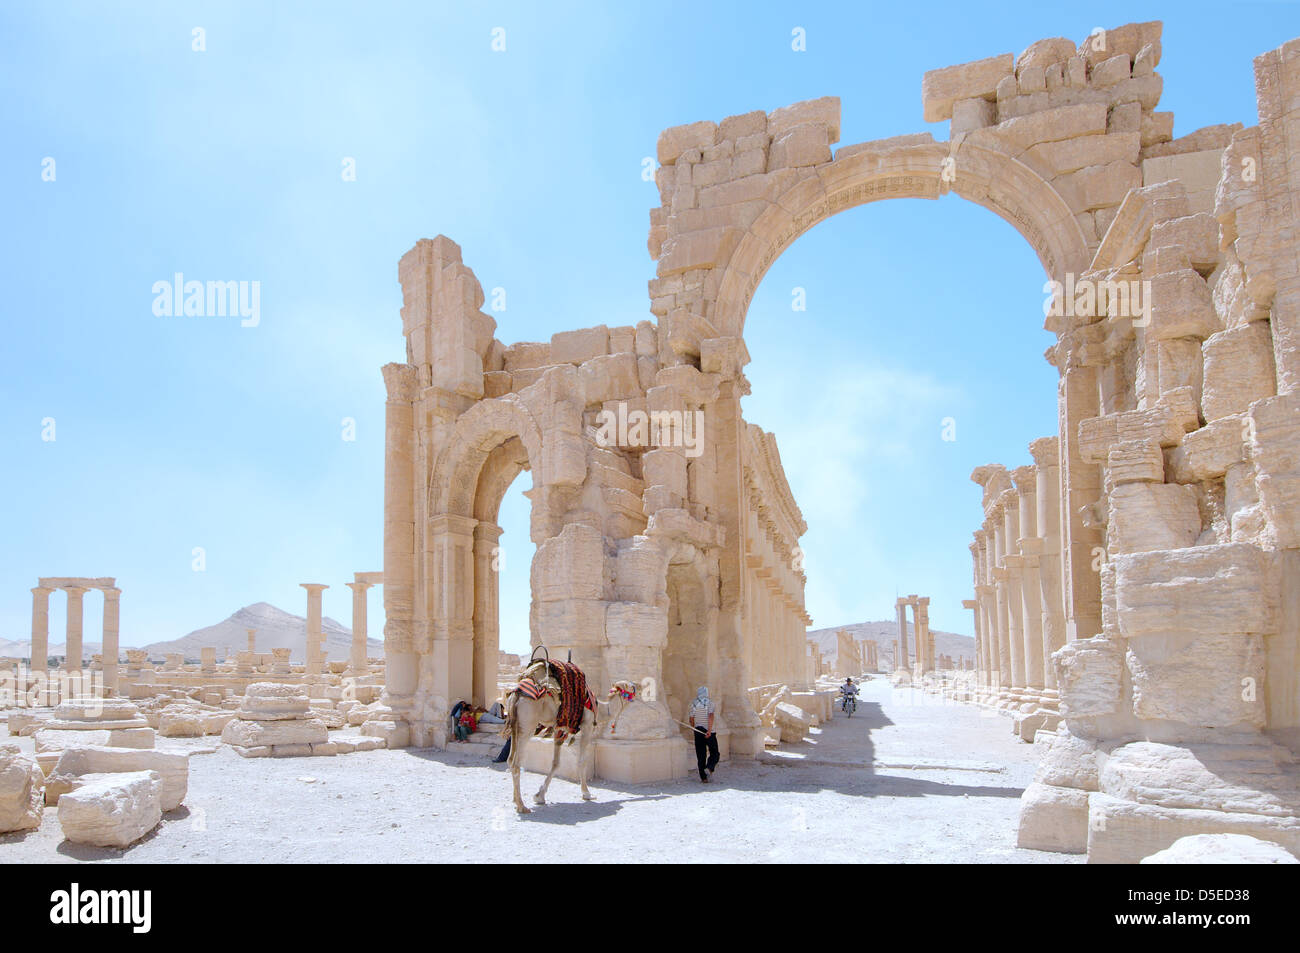 Monumental Arch, Arch of Triumph, or  Arch of Septimius Severus in Palmyra, Syria Stock Photo